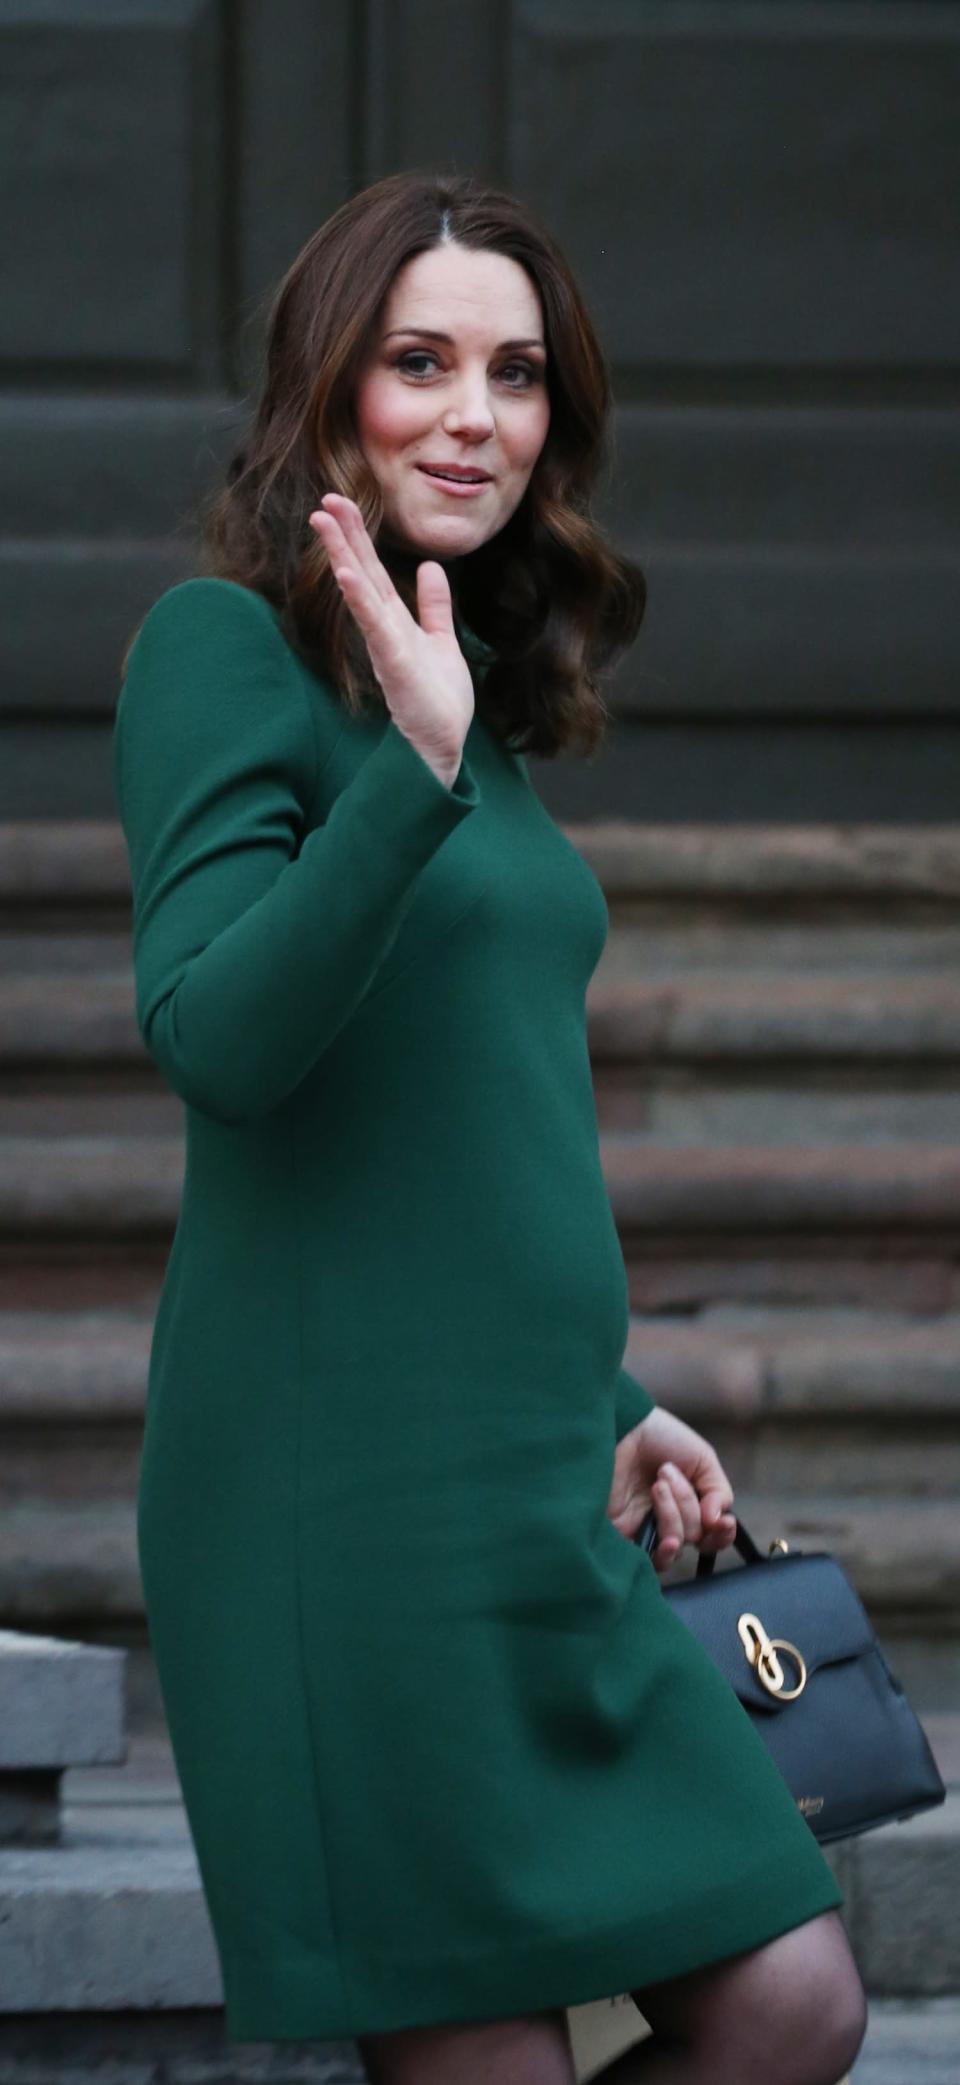 <p>Catherine, Duchess of Cambridge, visits the Nobel Museum wearing a hunter-green dress on a royal visit to Sweden and Norway with Prince William, on Jan. 30, 2018. (Photo: Getty Images) </p>